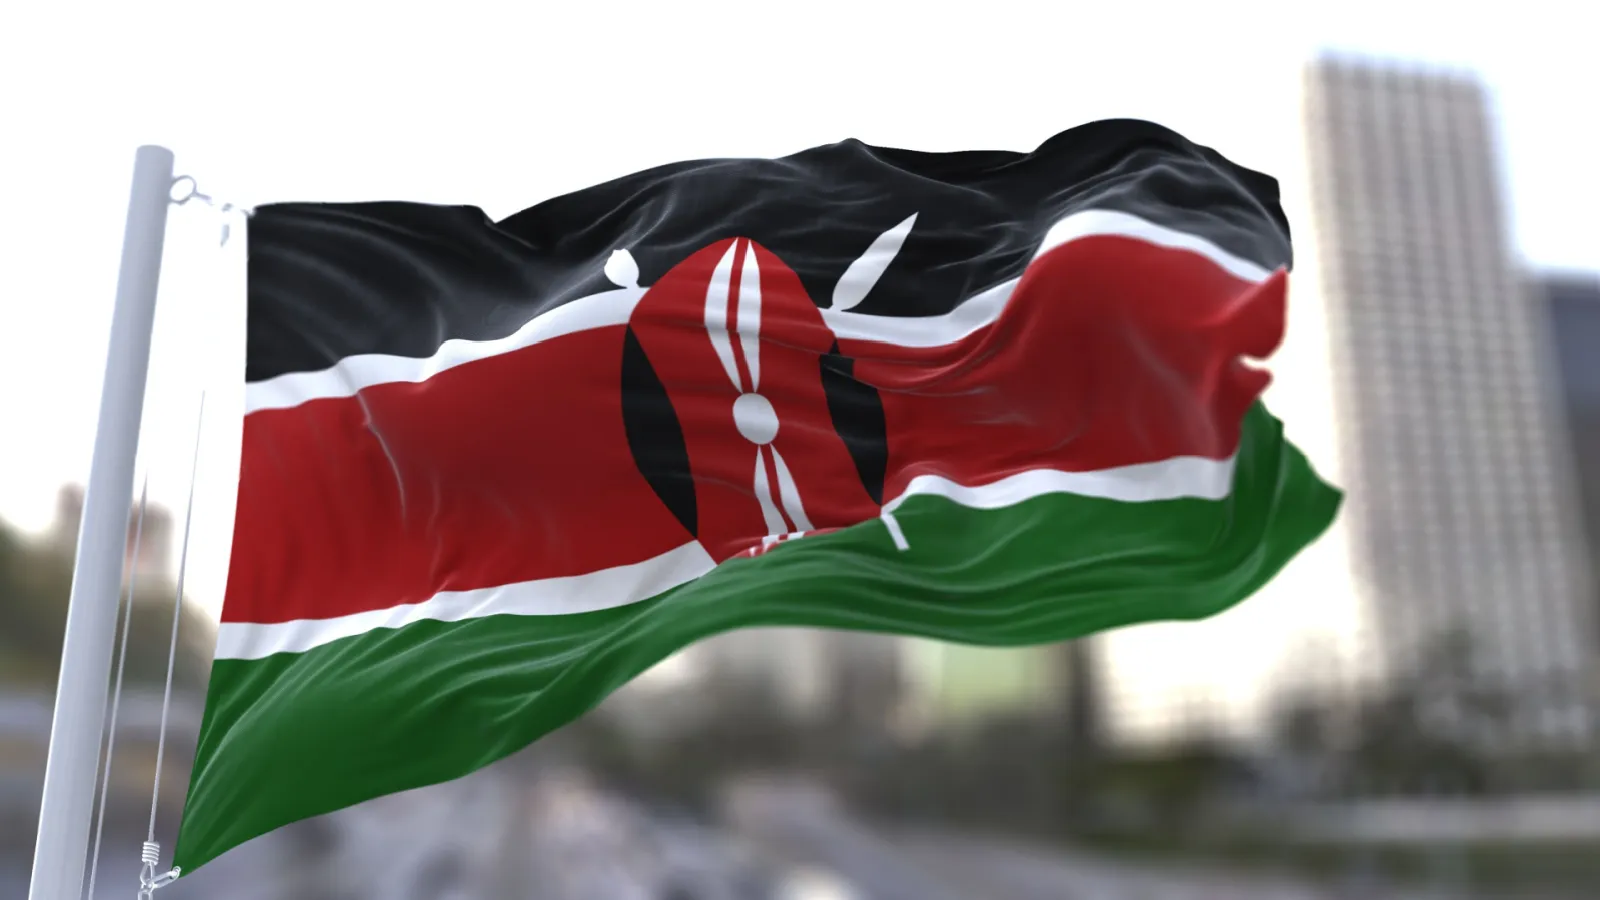 Youth in Kenya face a 67% unemployment rate, according to The Federation of Kenya Employers. Image: Shutterstock